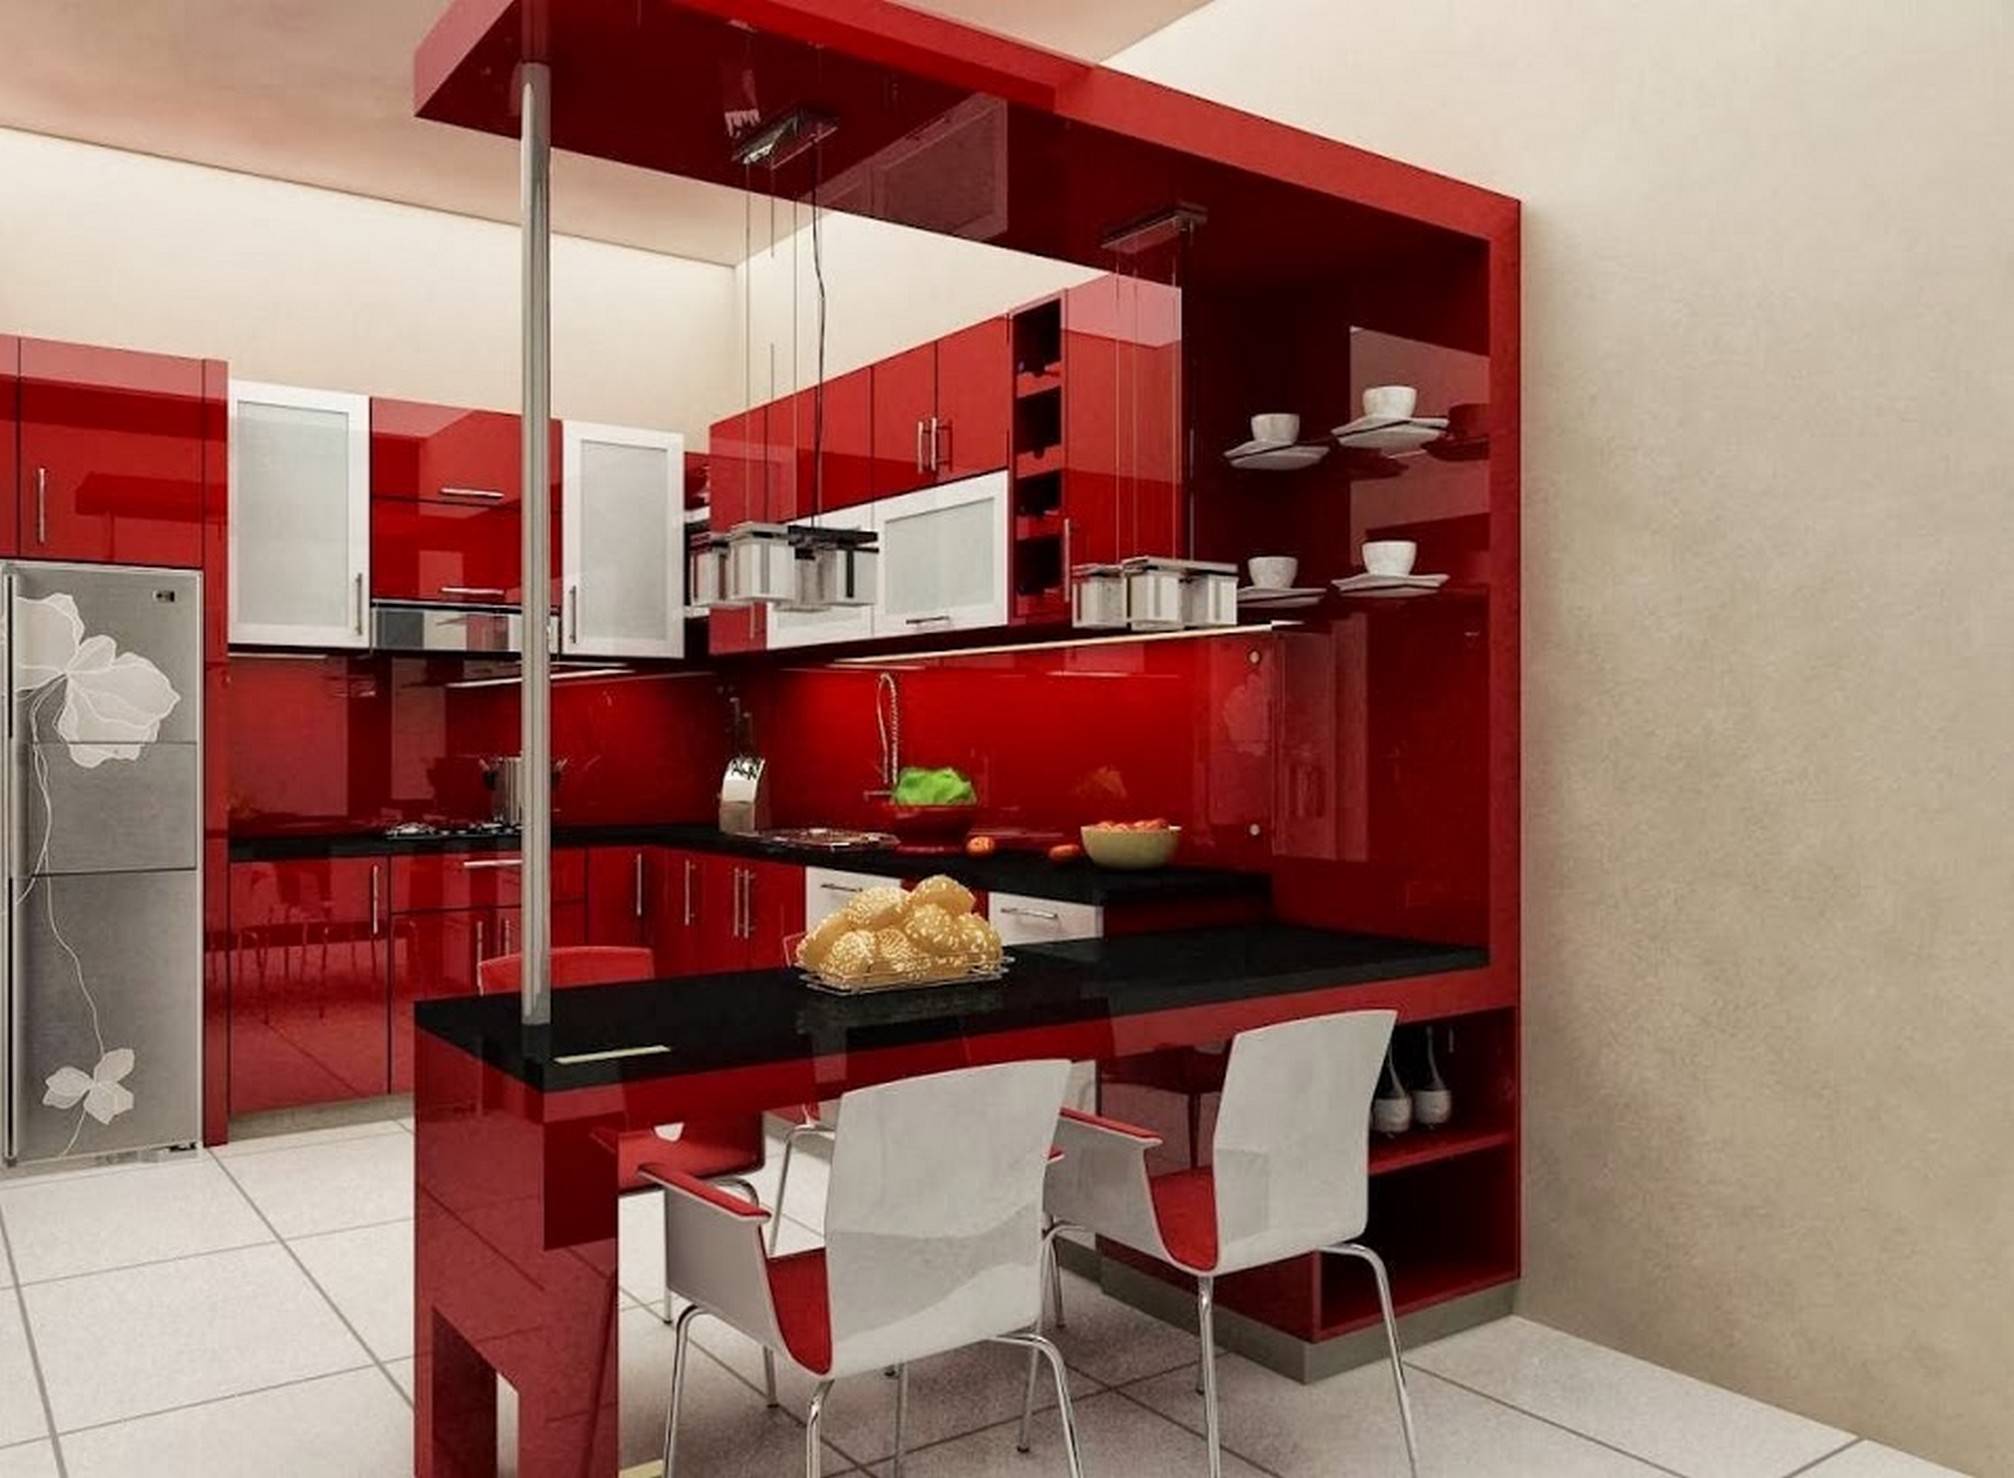 Minimalist interior concept with red kitchen cabinets for contemporary home with mini bar and granite countertop